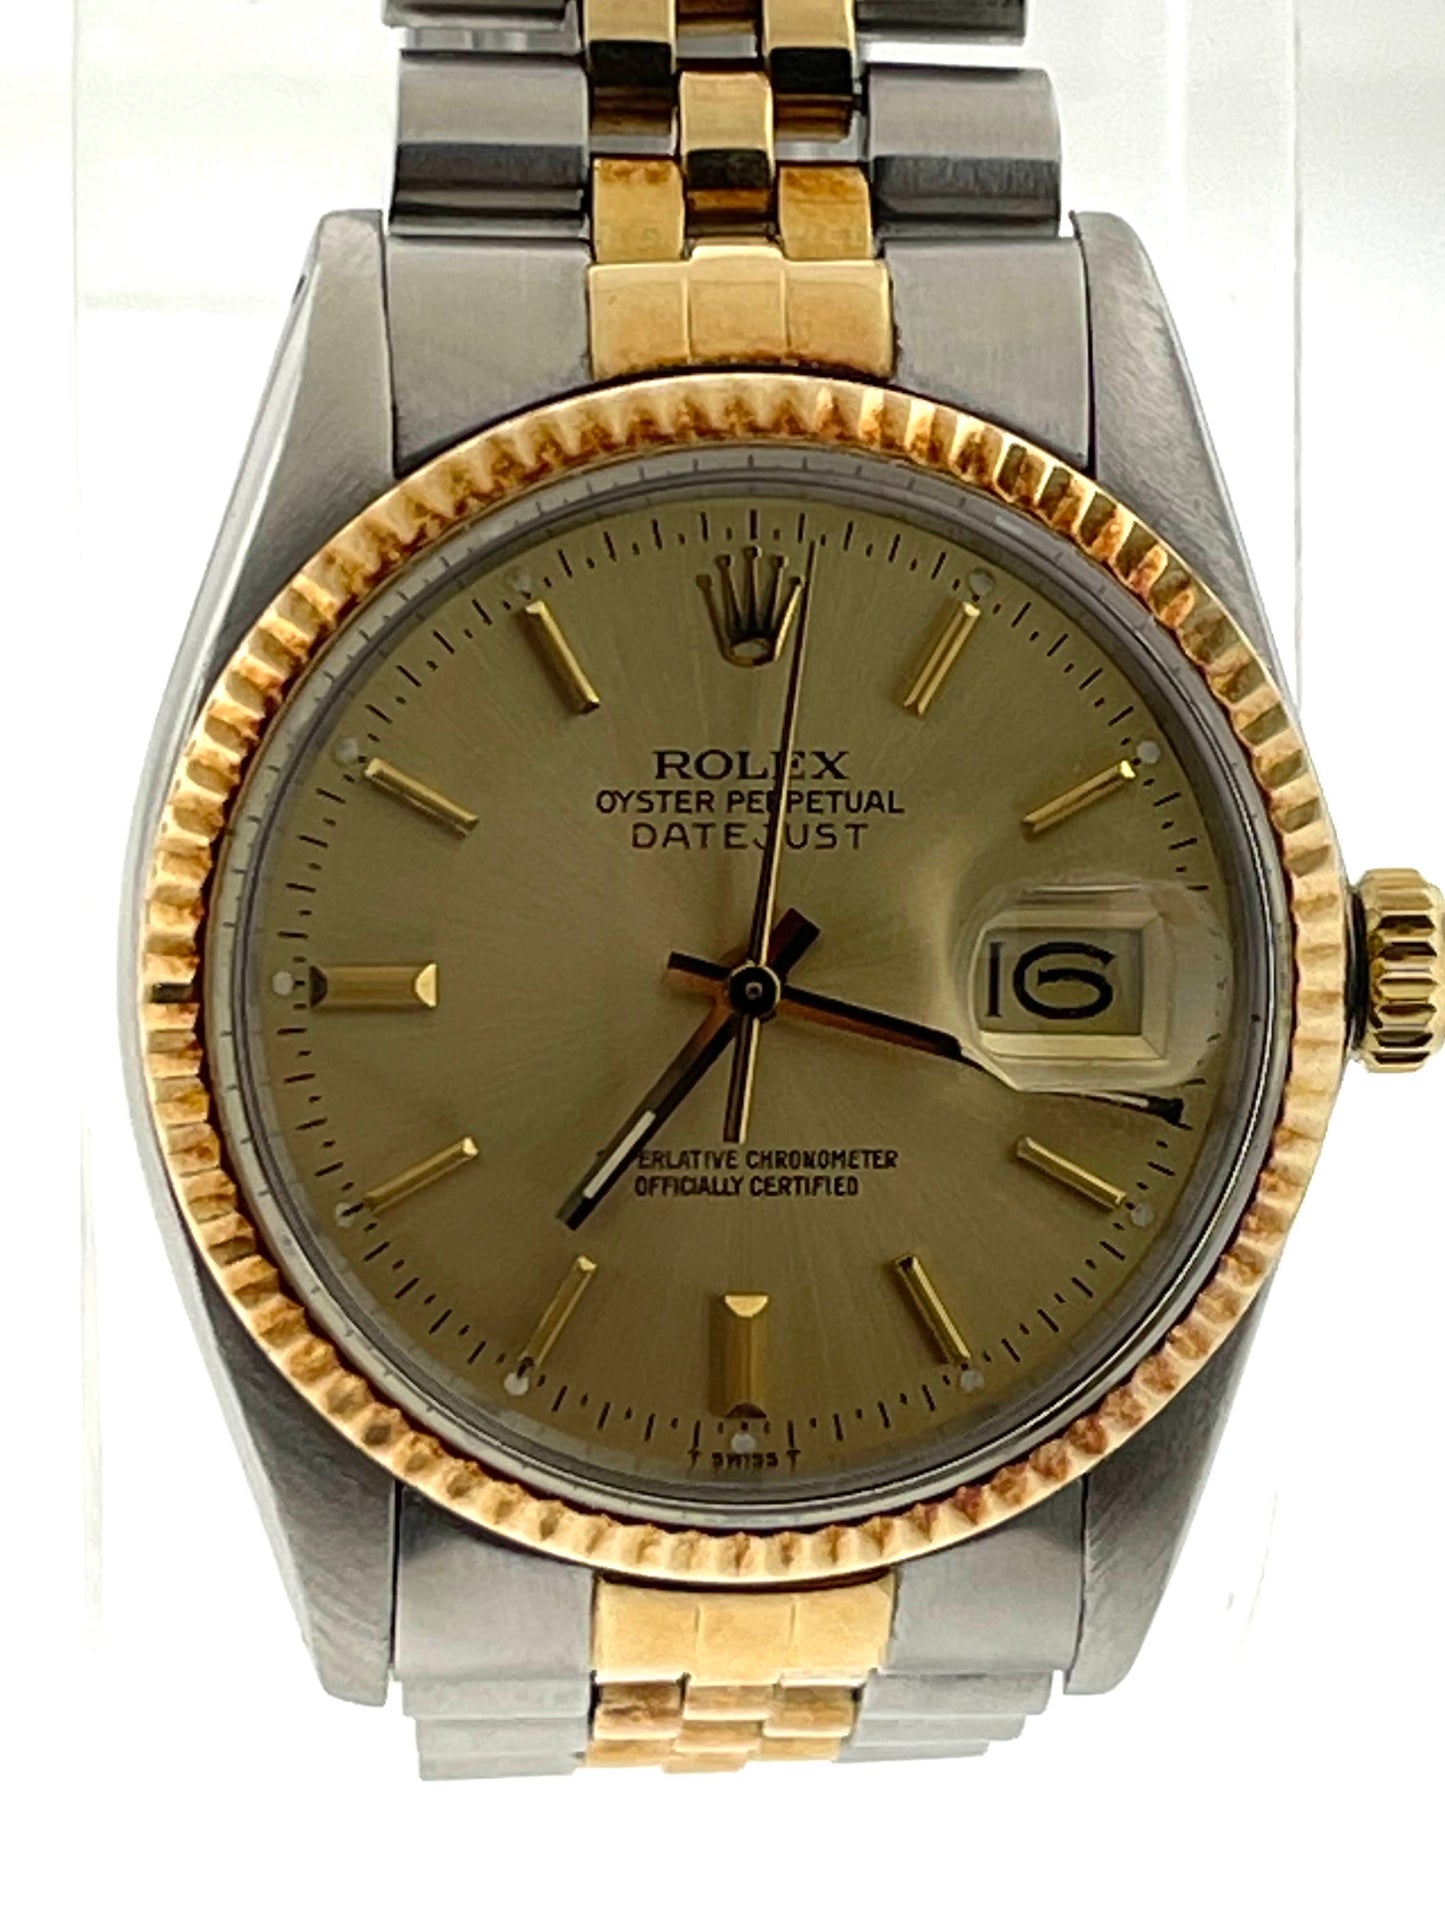 1981 Rolex Datejust 16013 Champagne Dial No Papers 36mm